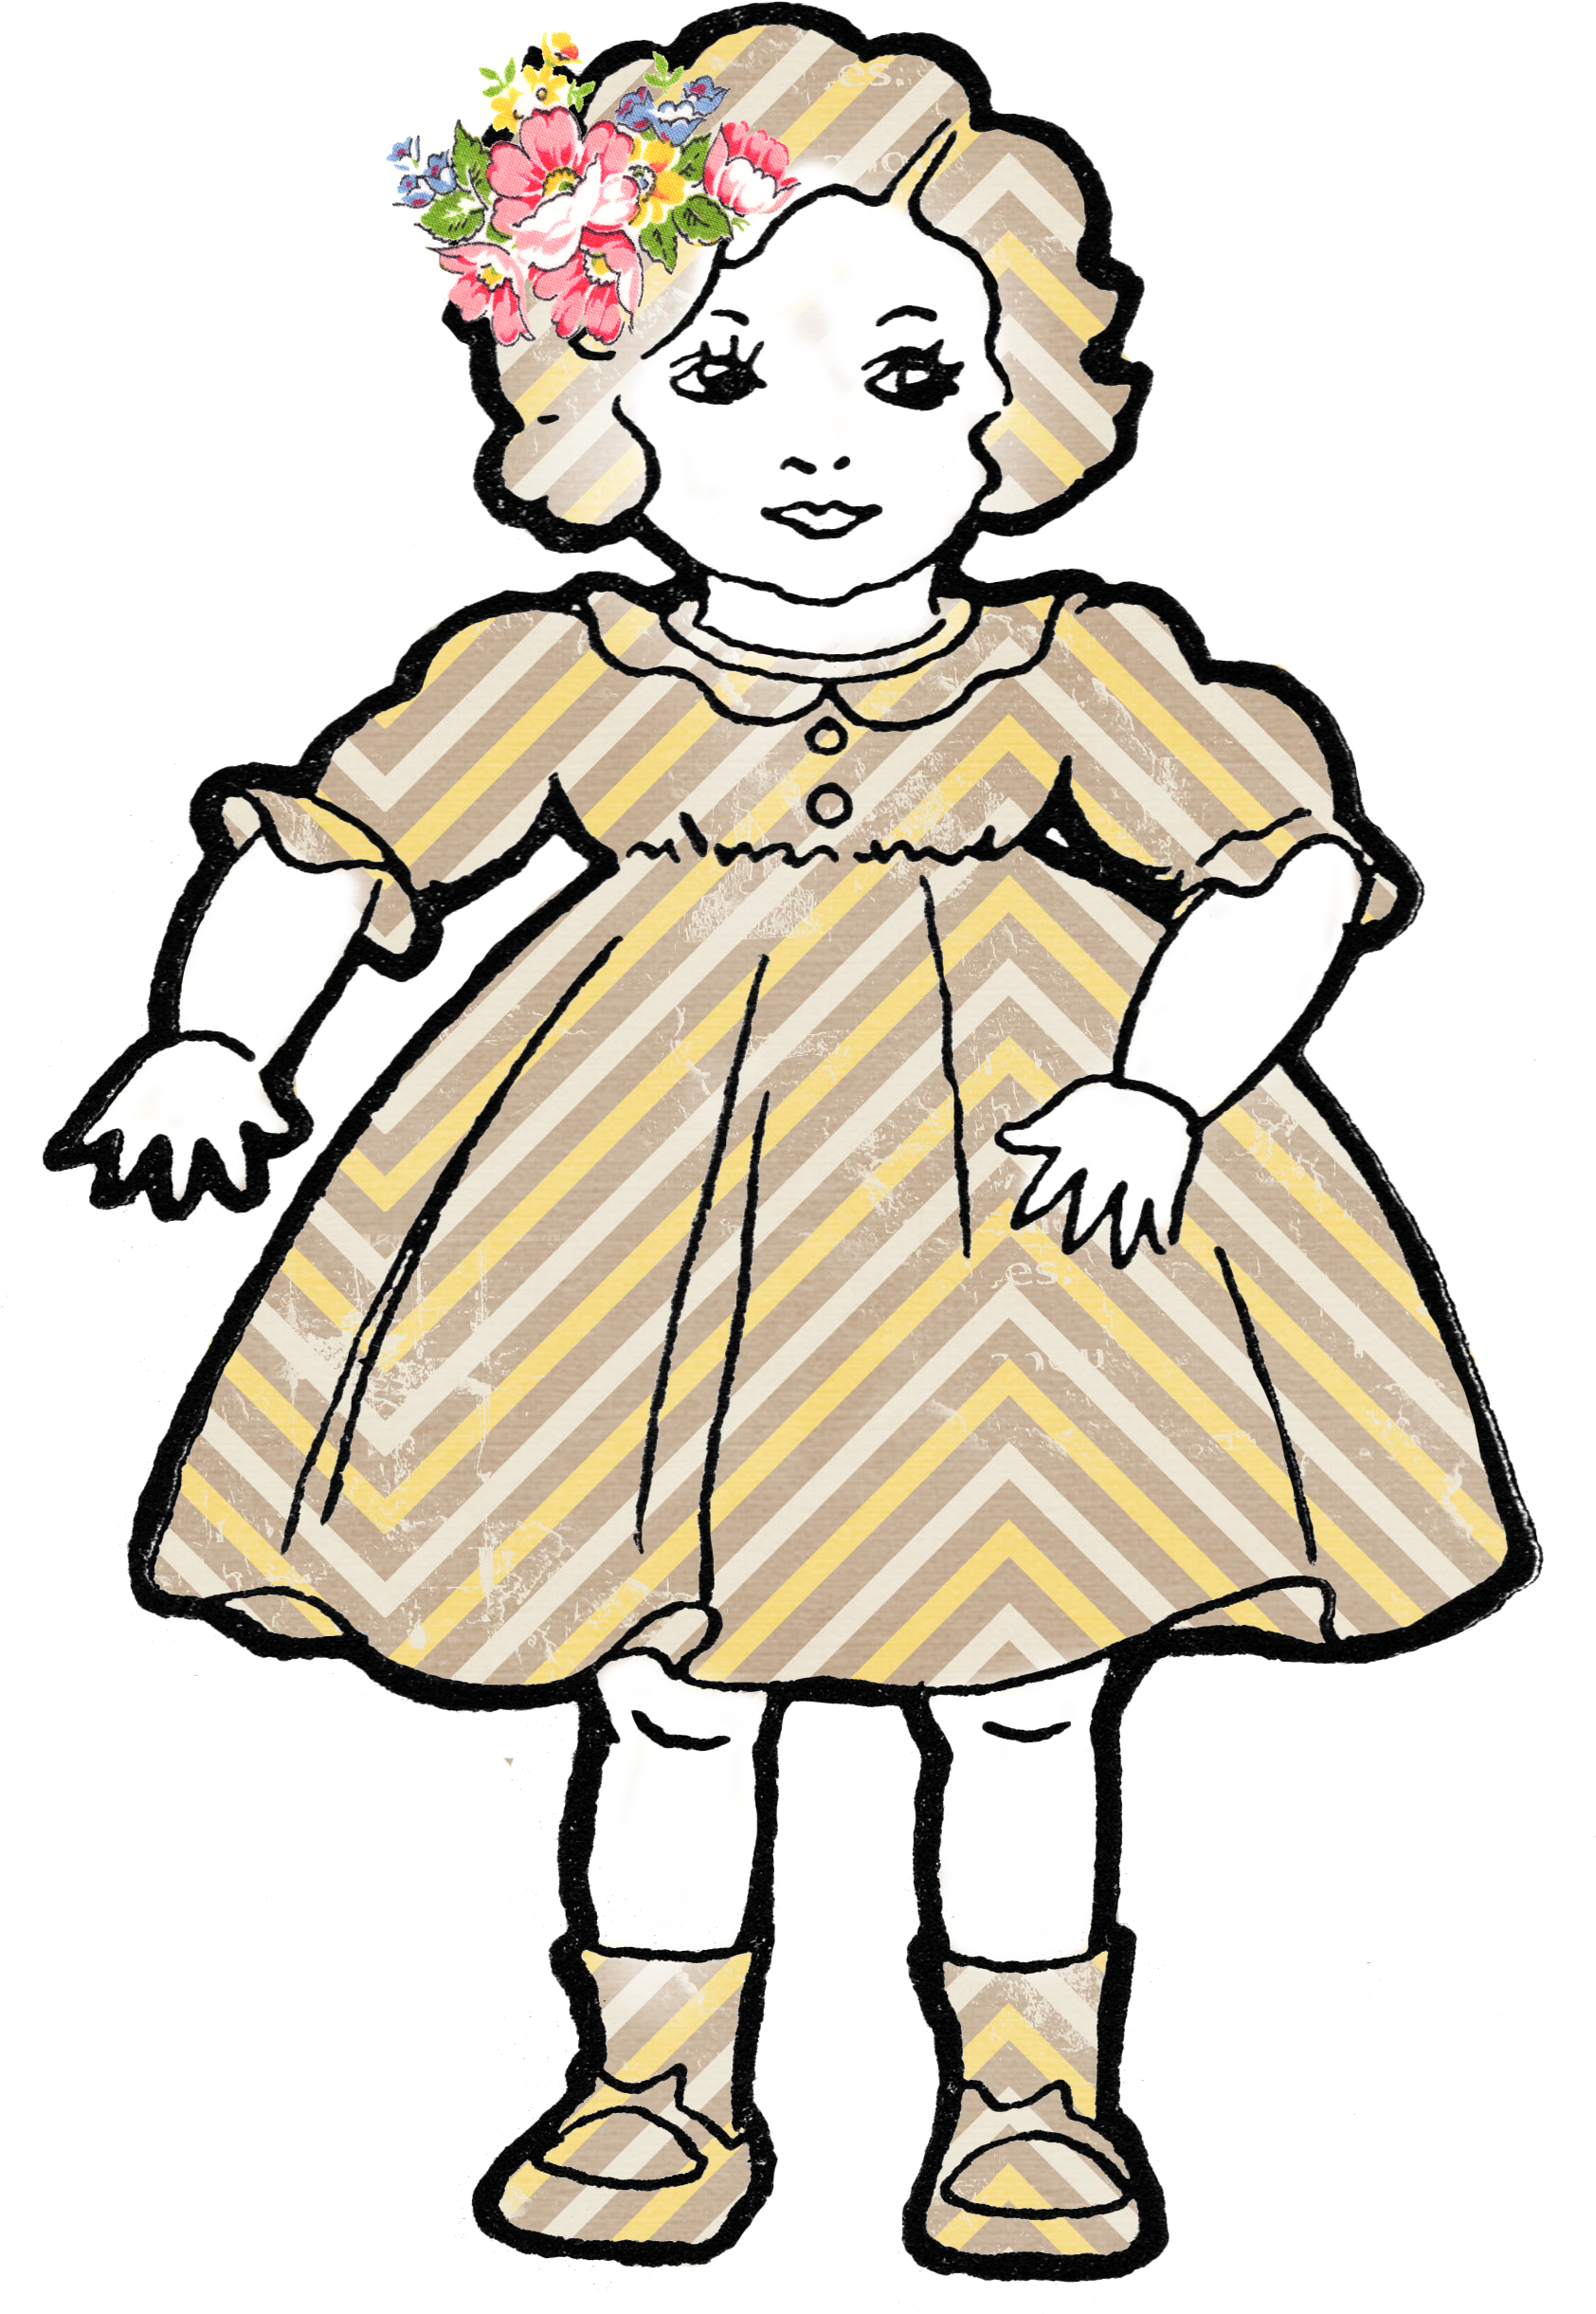 clipart of a doll - photo #19